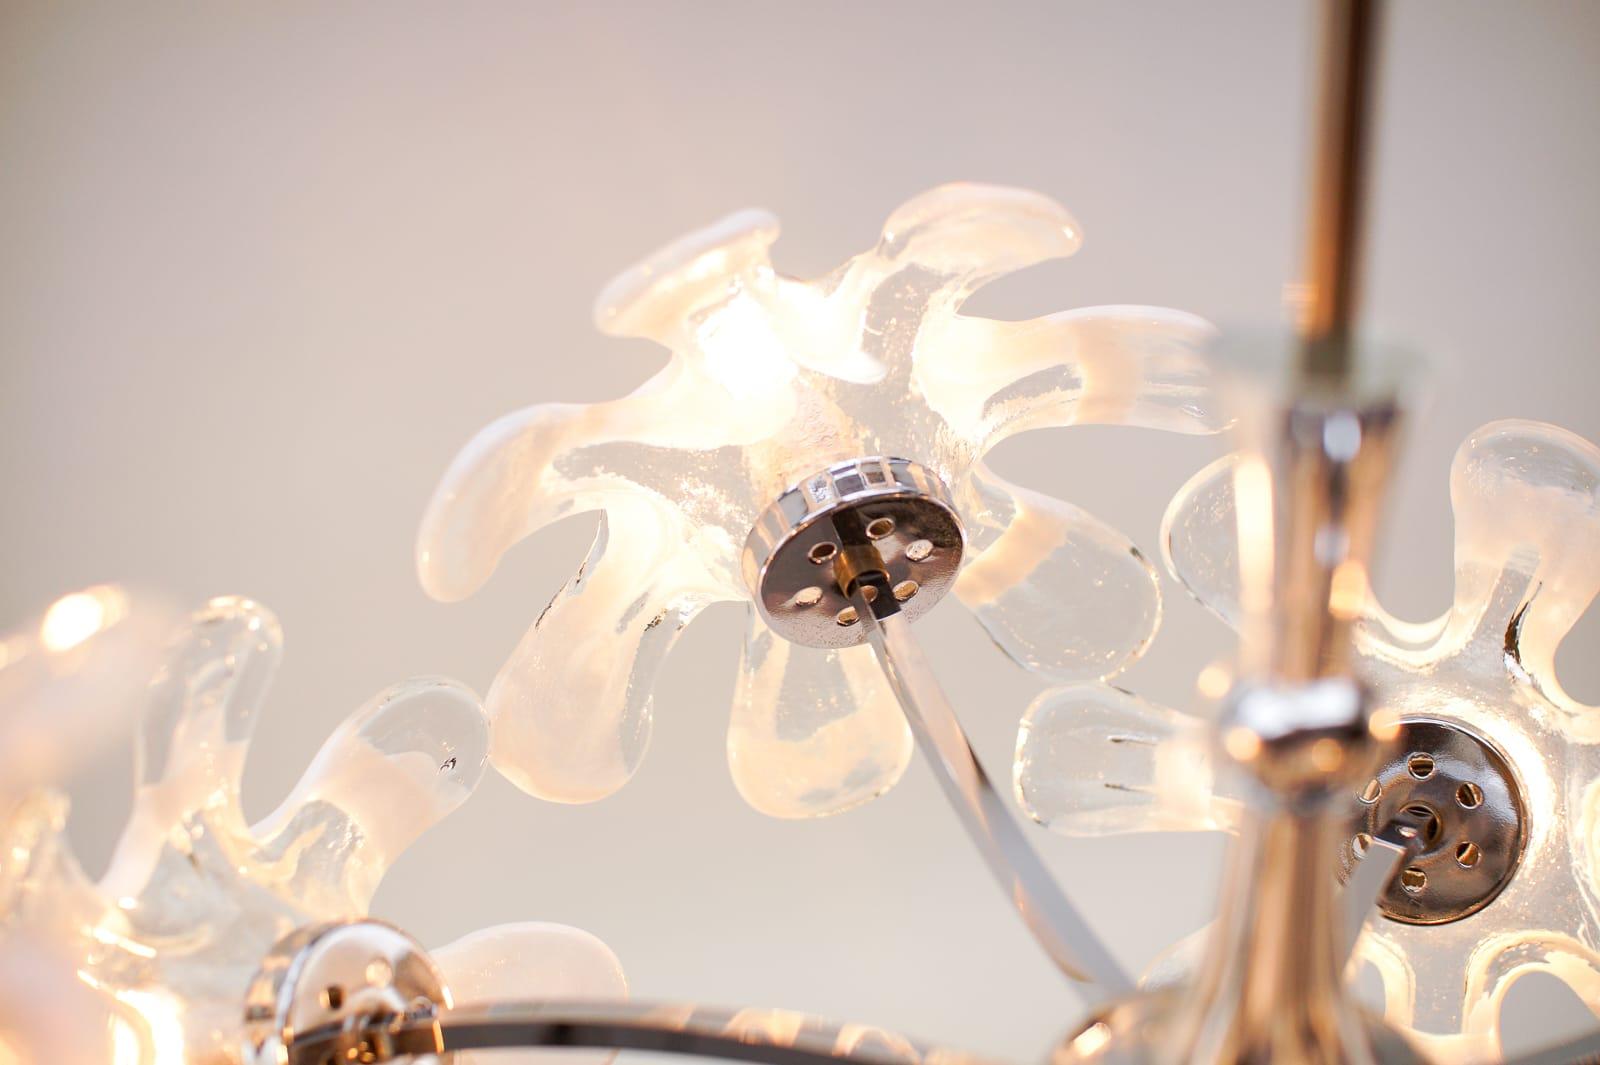 Space Age Chrome and Murano Glass Flowers Sputnik Lamp, 1970s For Sale 7